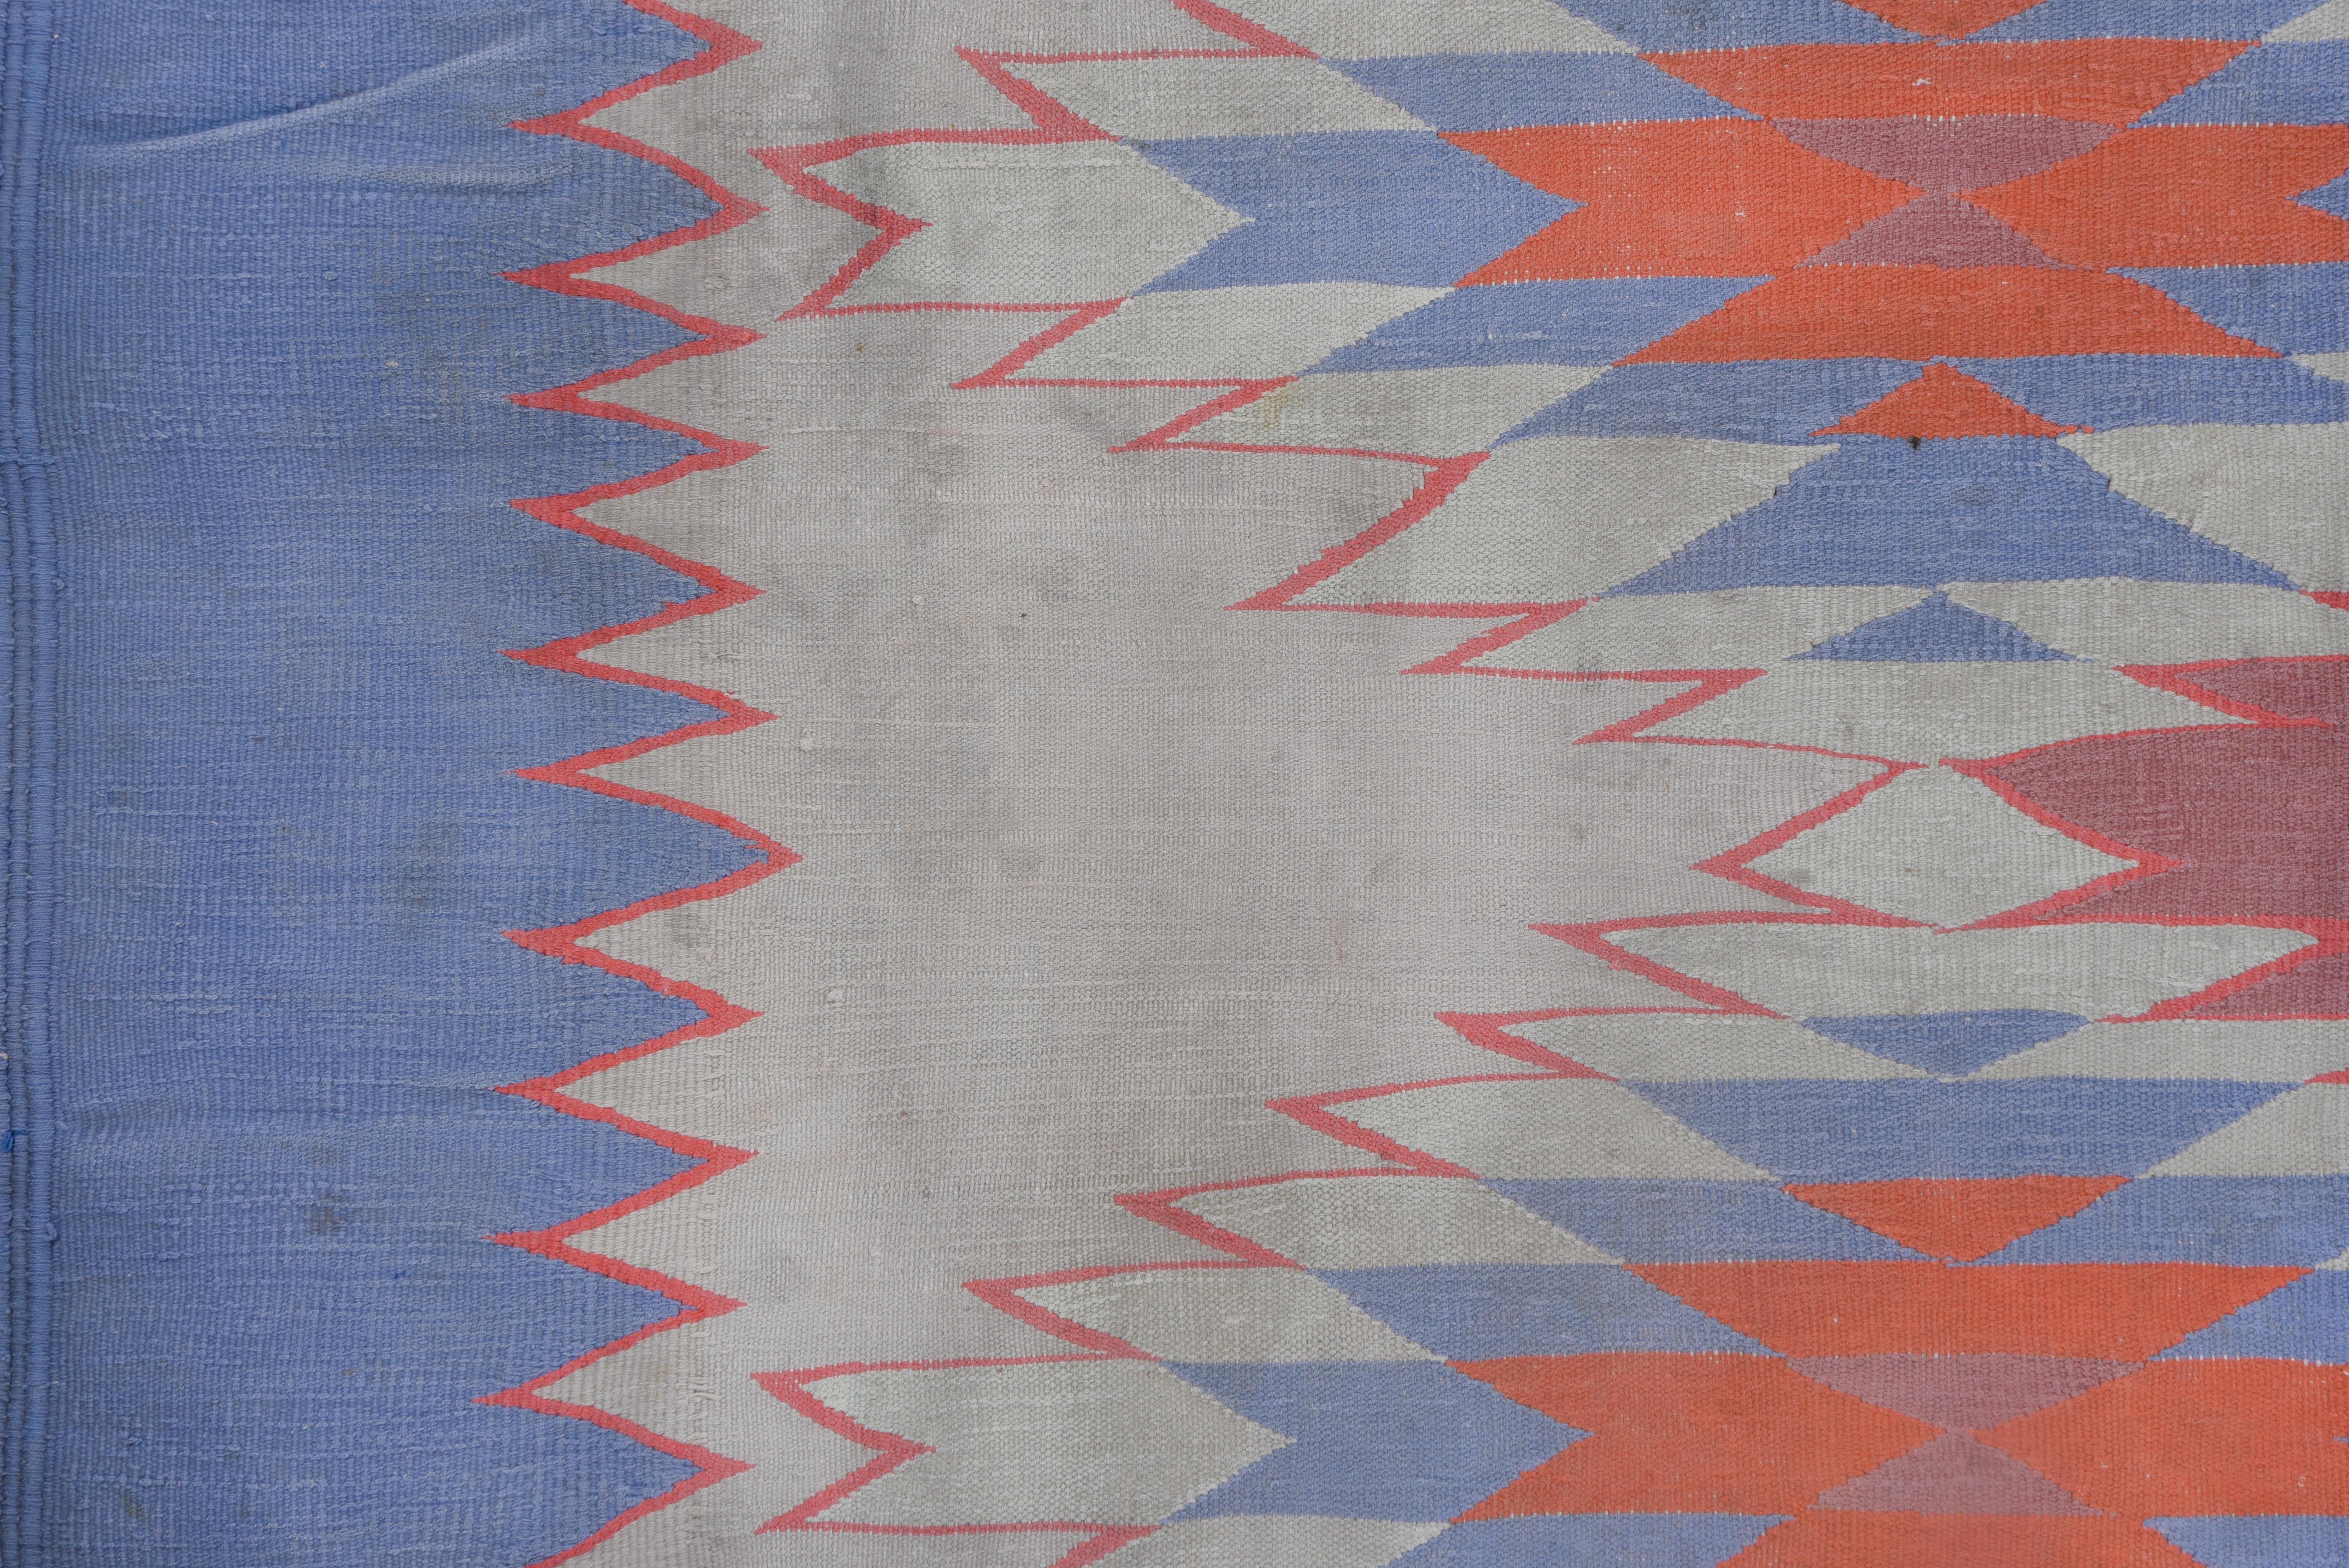 1940s Art Deco Cotton Shurrie Rug, Gray, Coral & Orange Field, Blue Borders For Sale 1